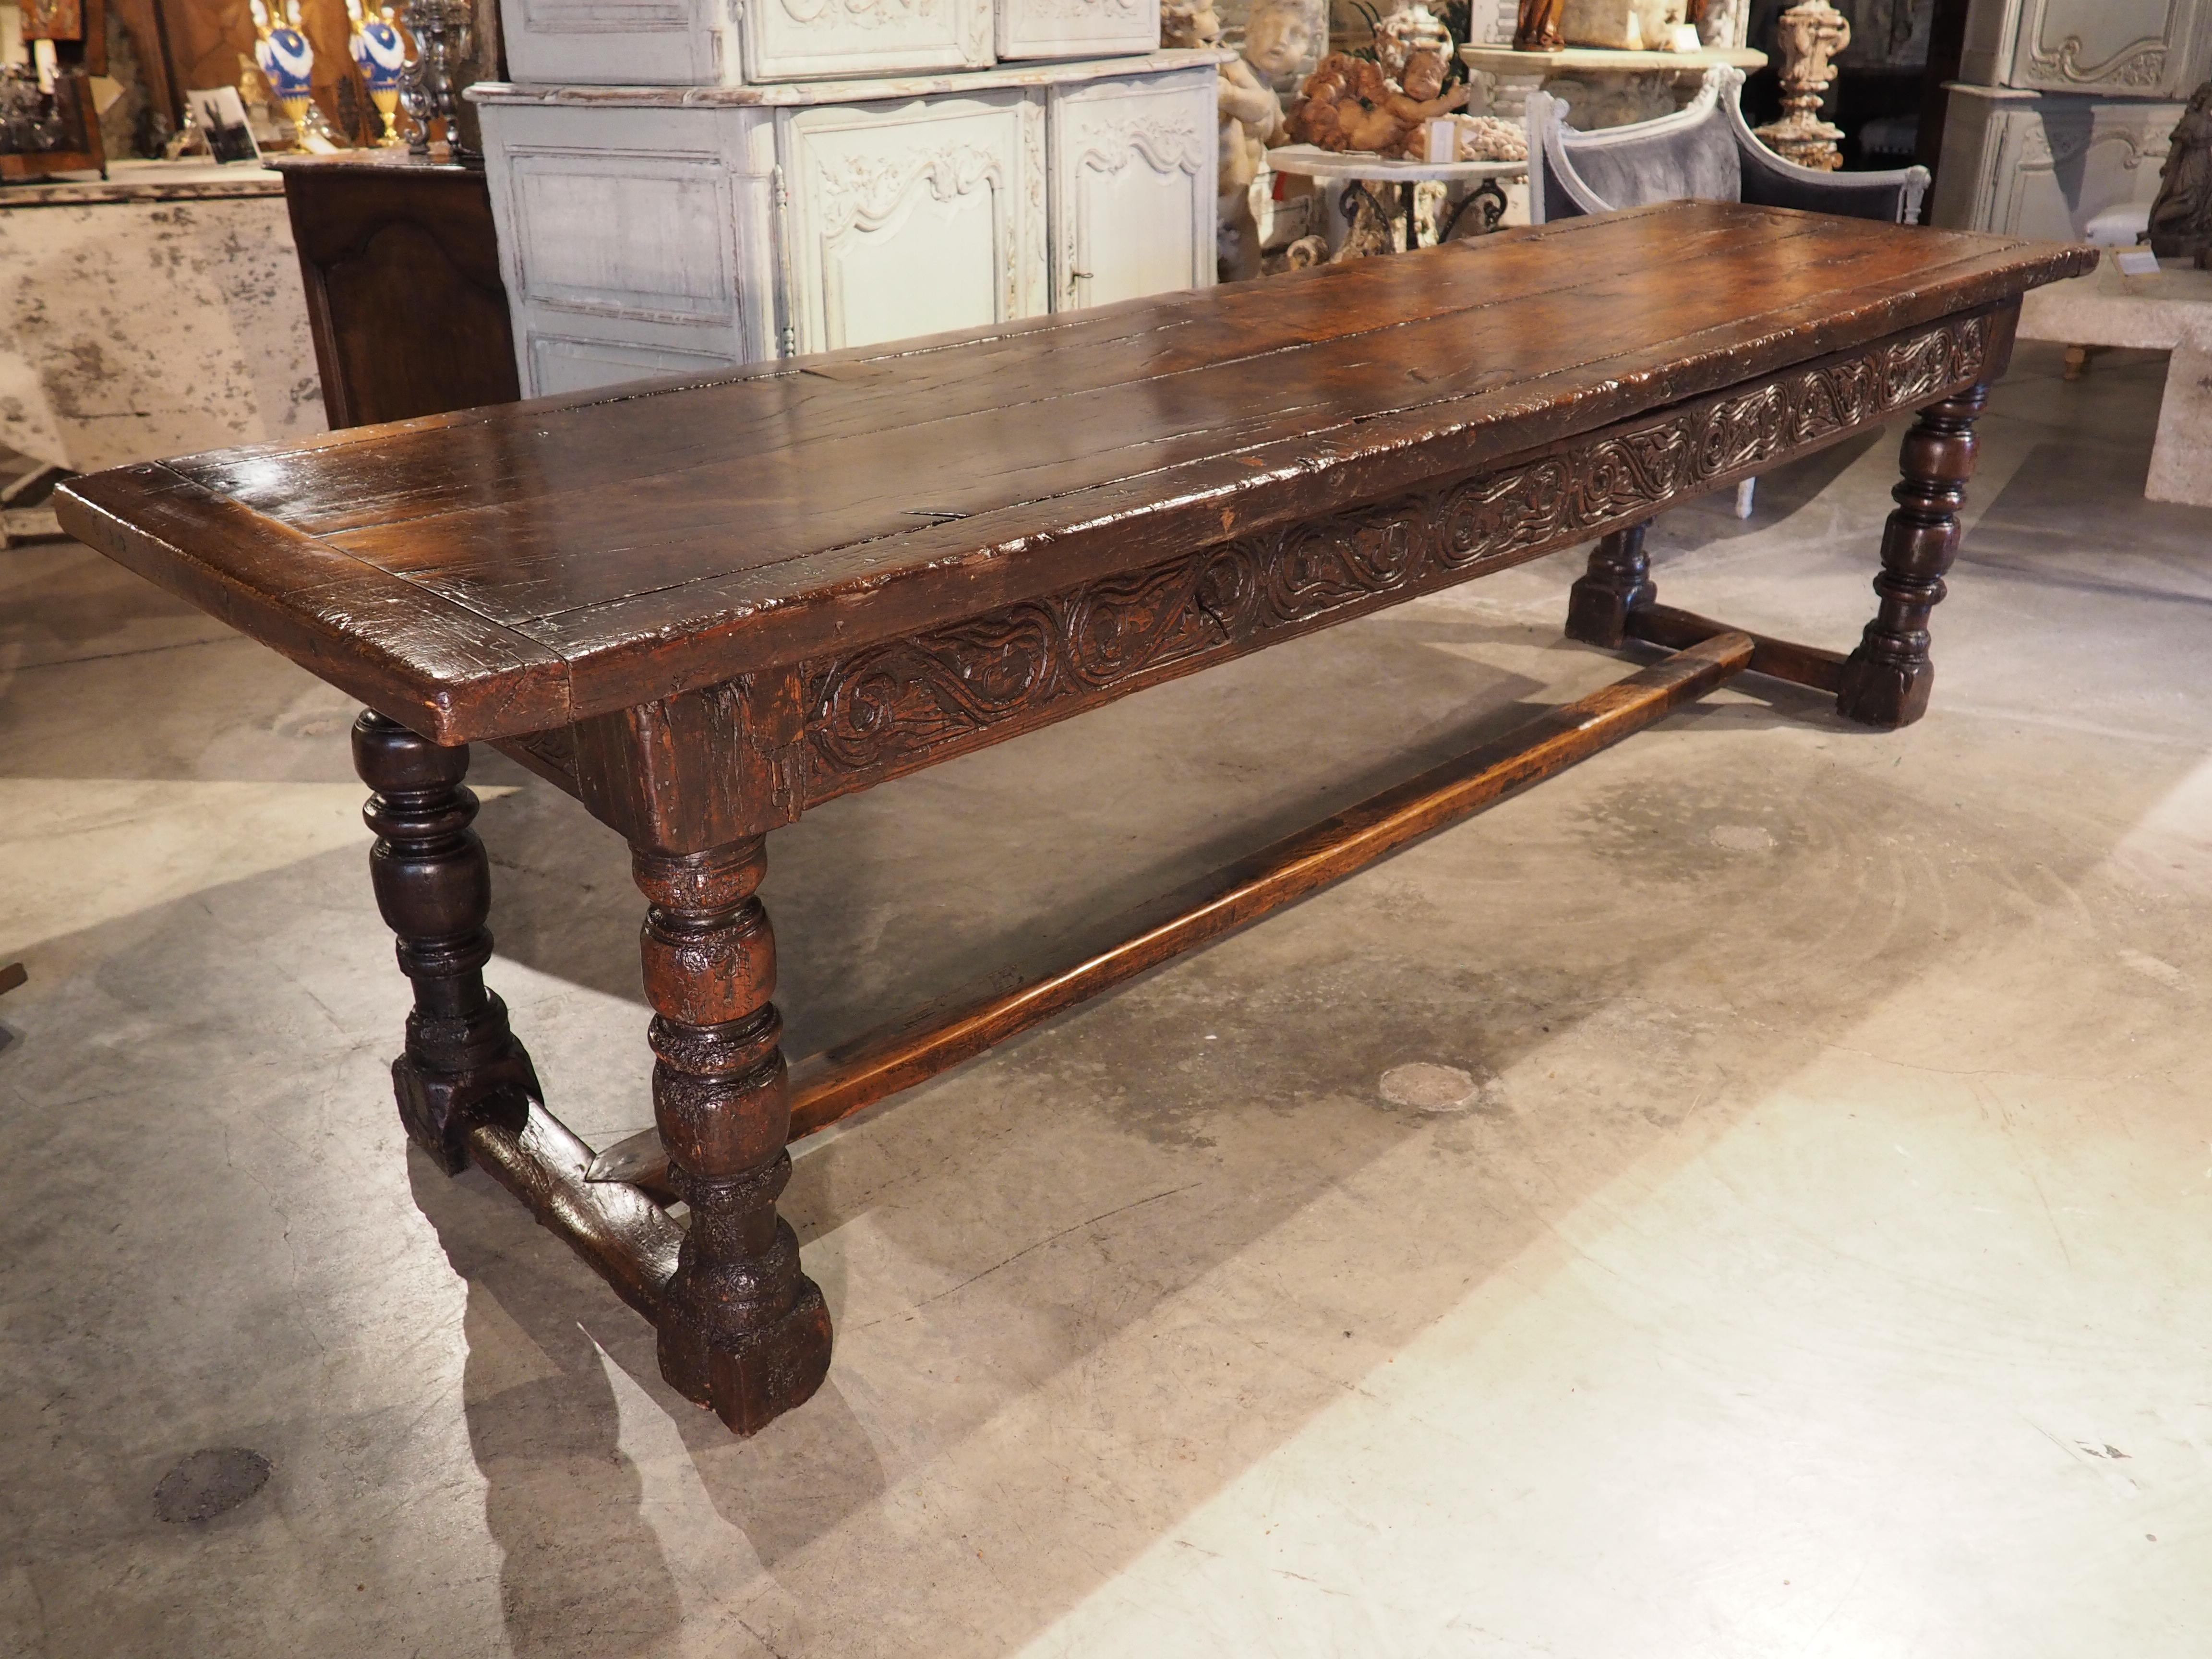 At over nine feet long, this sumptuous oak baluster leg table was hand-carved with an H-stretcher in Flanders, circa 1680. Long tables such as these were known as table de communauté and were designed to accommodate as many seats as possible.